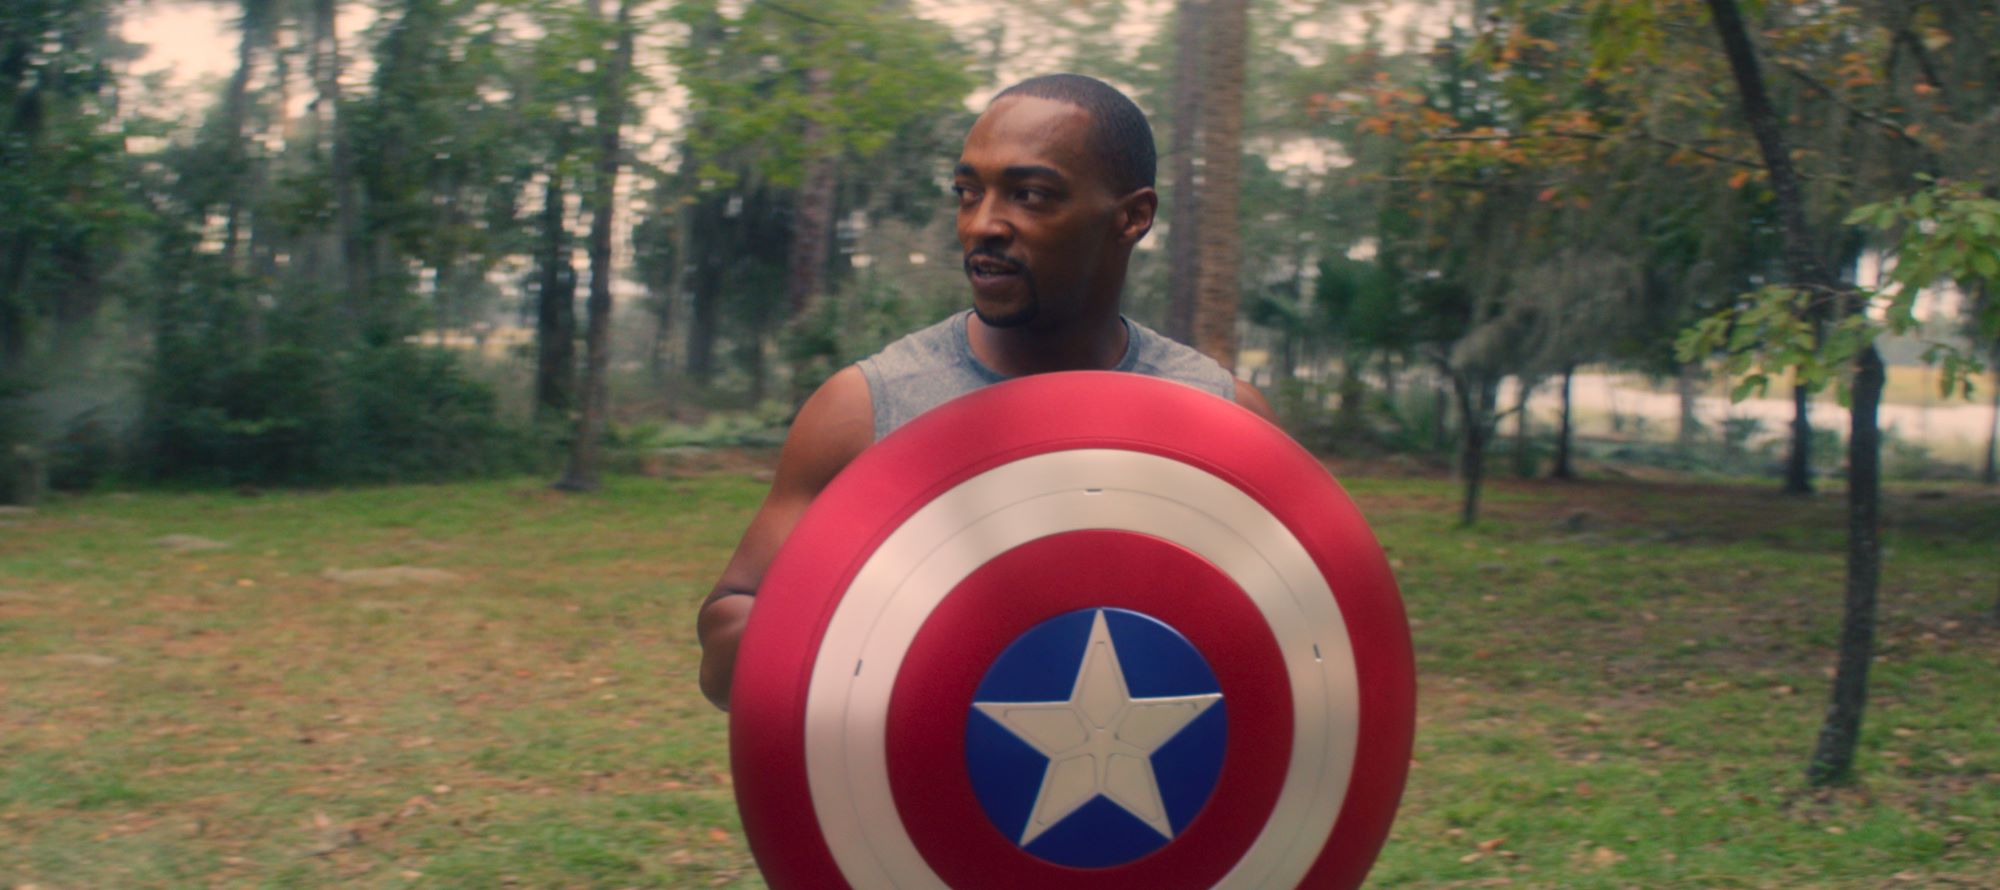 Anthony Mackie holding the Captain America shield in 'The Falcon and the Winter Soldier'